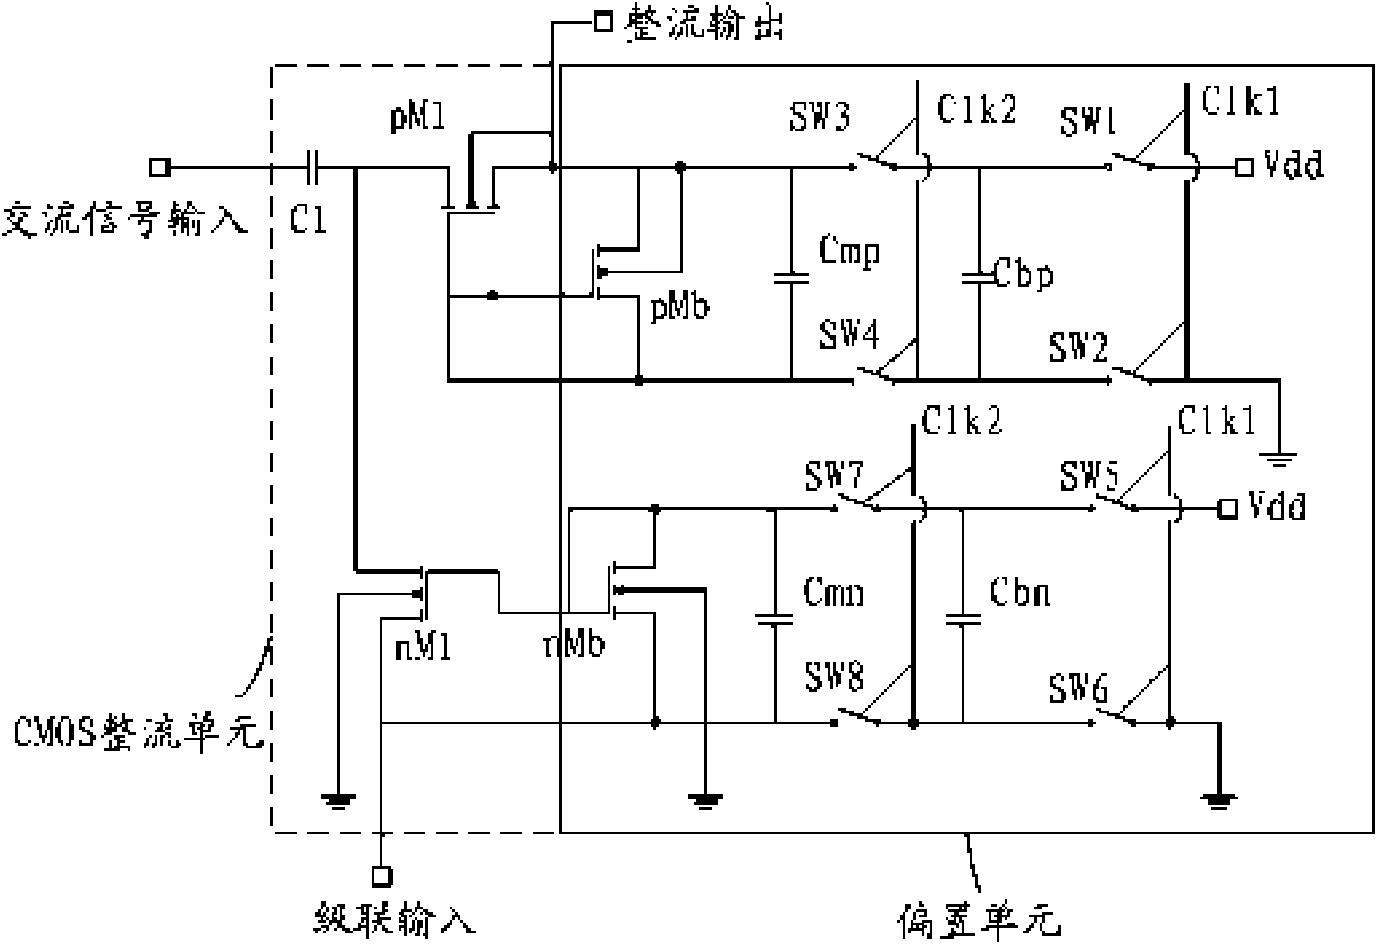 CMOS (Complementary Metal-Oxide-Semiconductor Transistor) rectifier